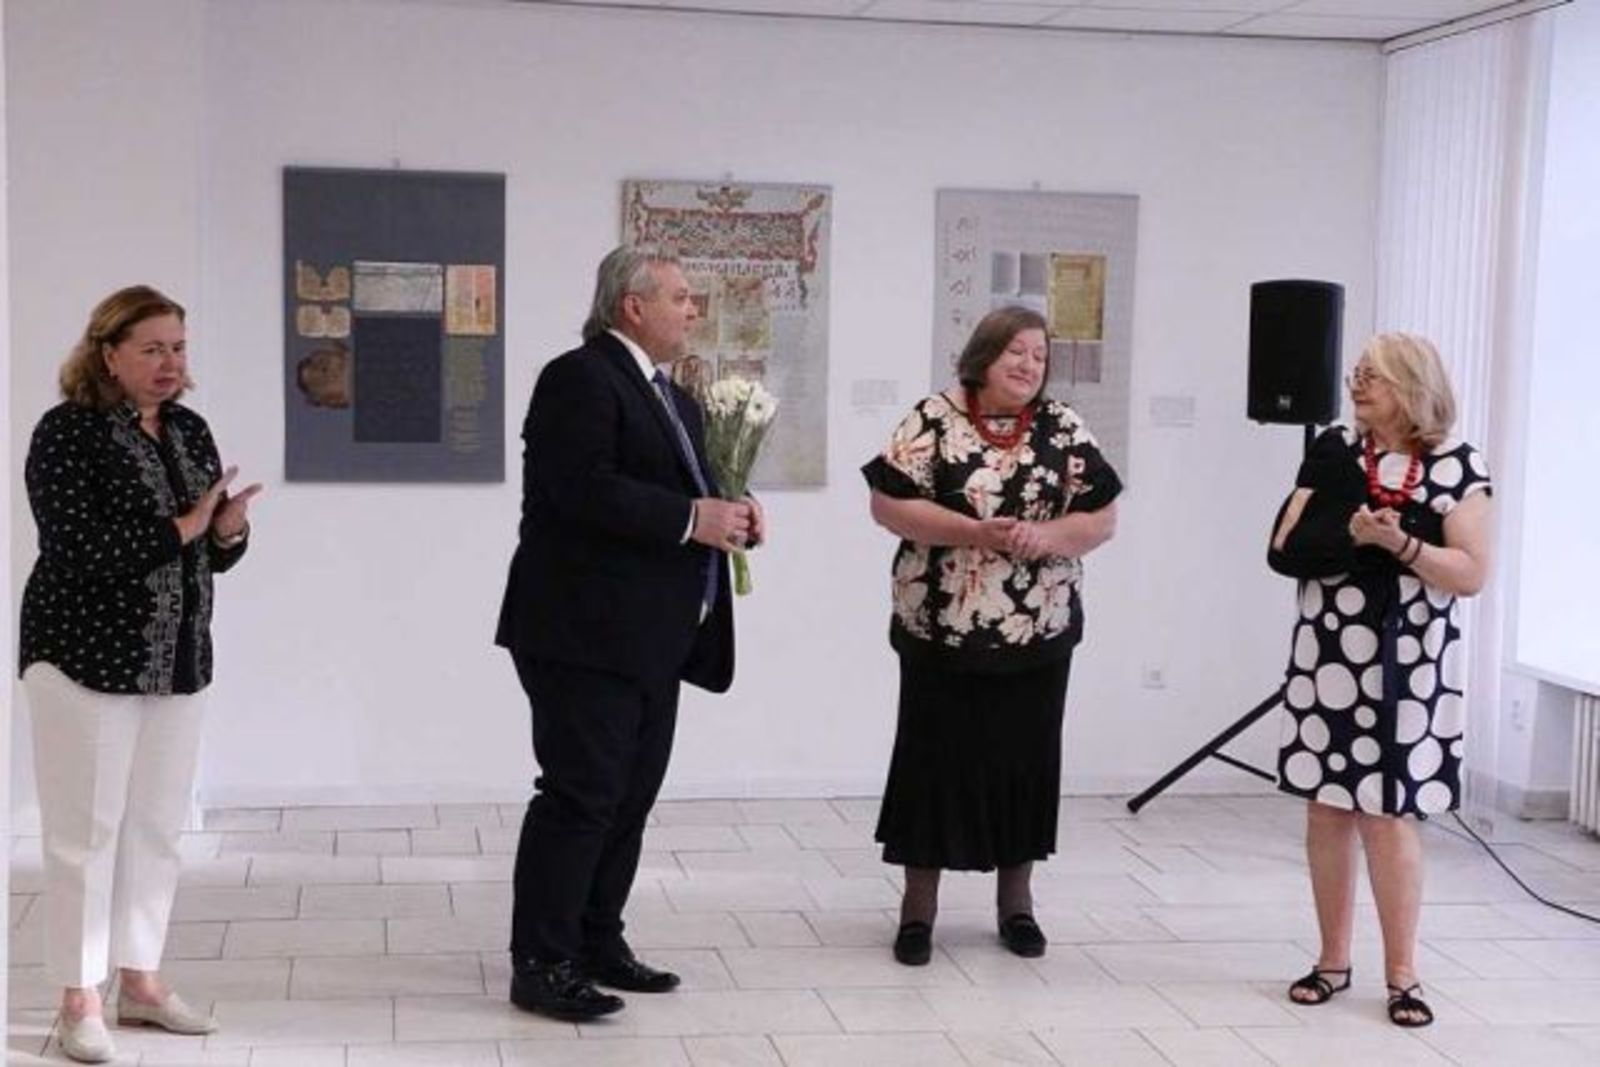 The "Alphabet and History" exhibition opened at the Bulgarian Cultural Institute in Slovakia